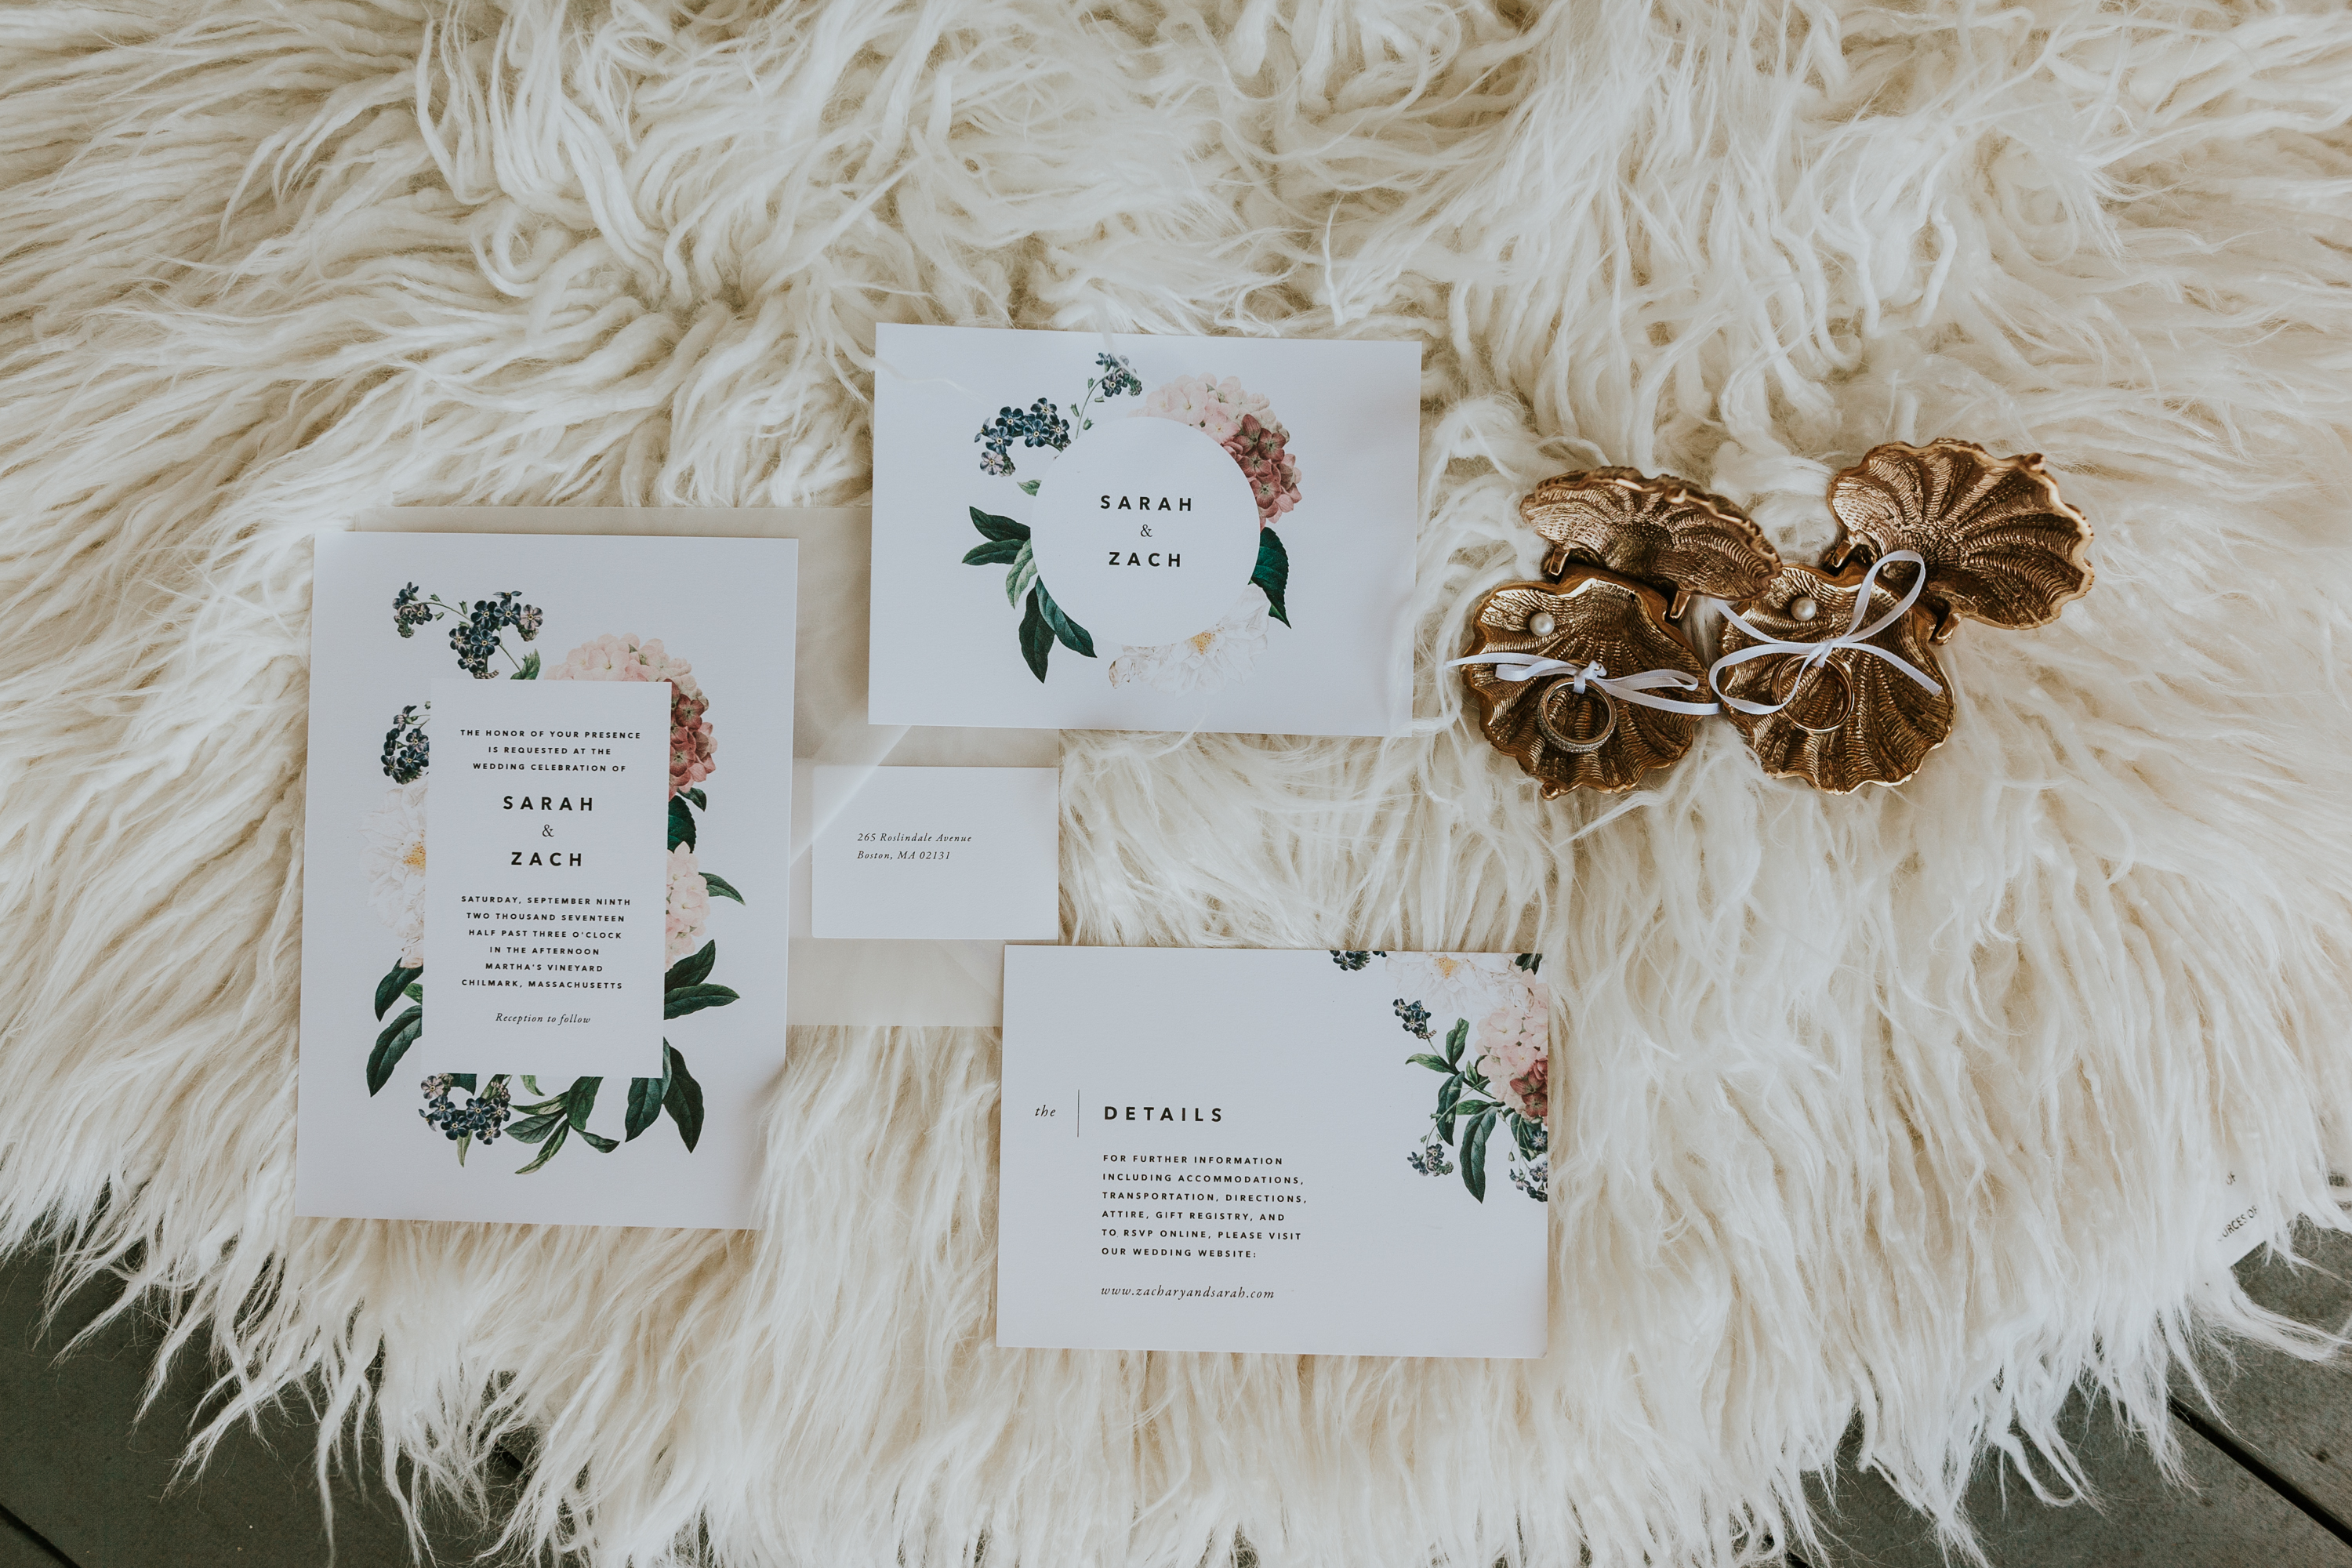 Invitation Suite, sarah and zach wedding invitations, floral invitation suite, wedding day details, floral invites on sheepskin rug, wedding rings in seashell